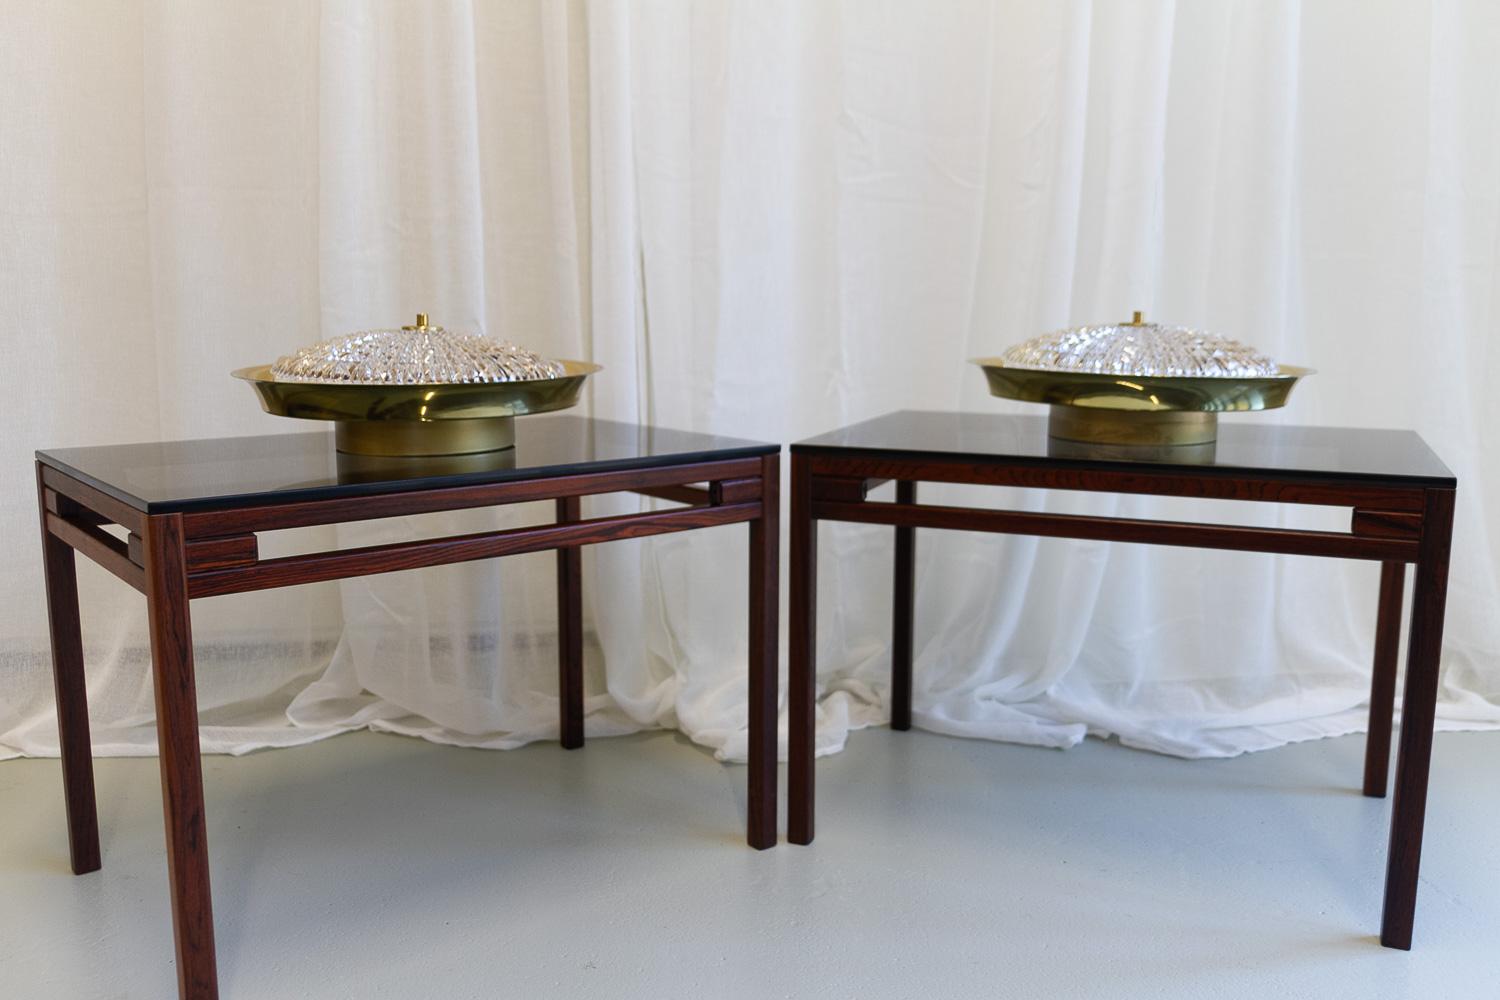 Orrefors Brass Wall or Ceiling Lamps by Fagerlund for Lyfa, 1960s. Set of 2. For Sale 8